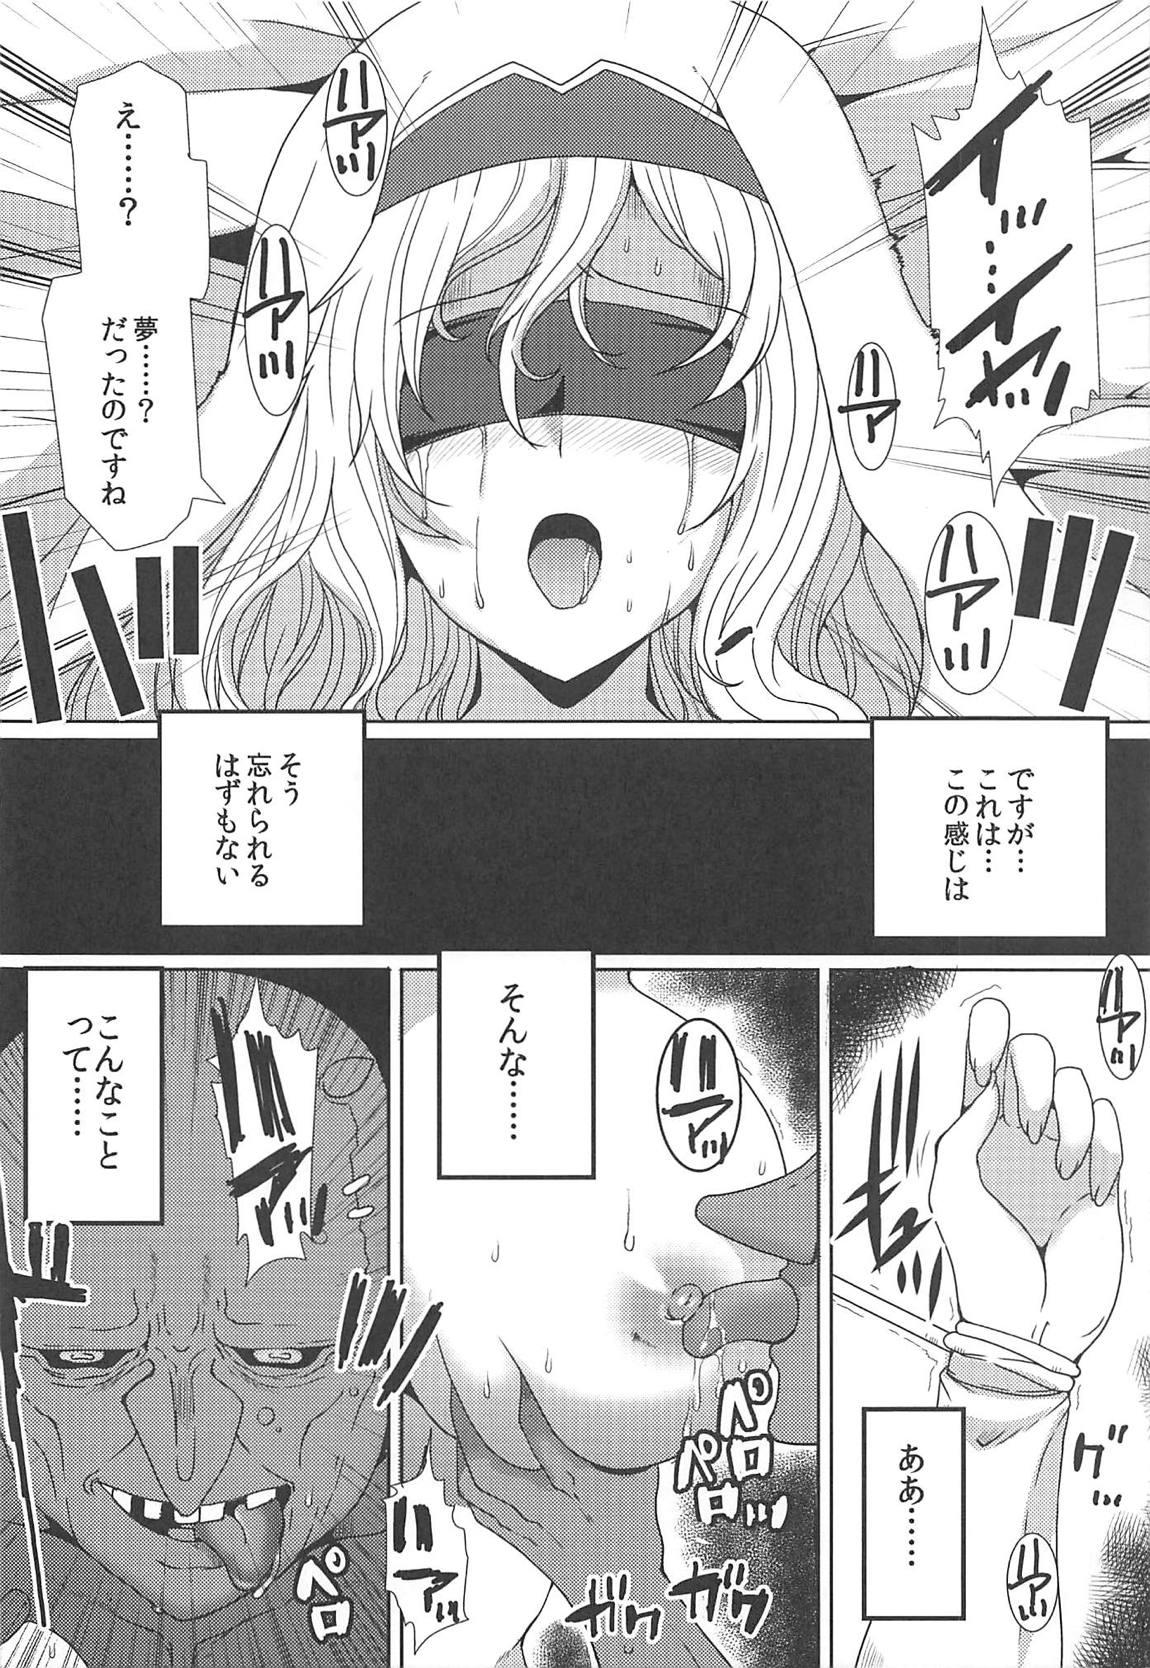 Swallowing Subete Yo wa Koto mo Nashi - All the world is things even without - Goblin slayer Gay Friend - Page 9